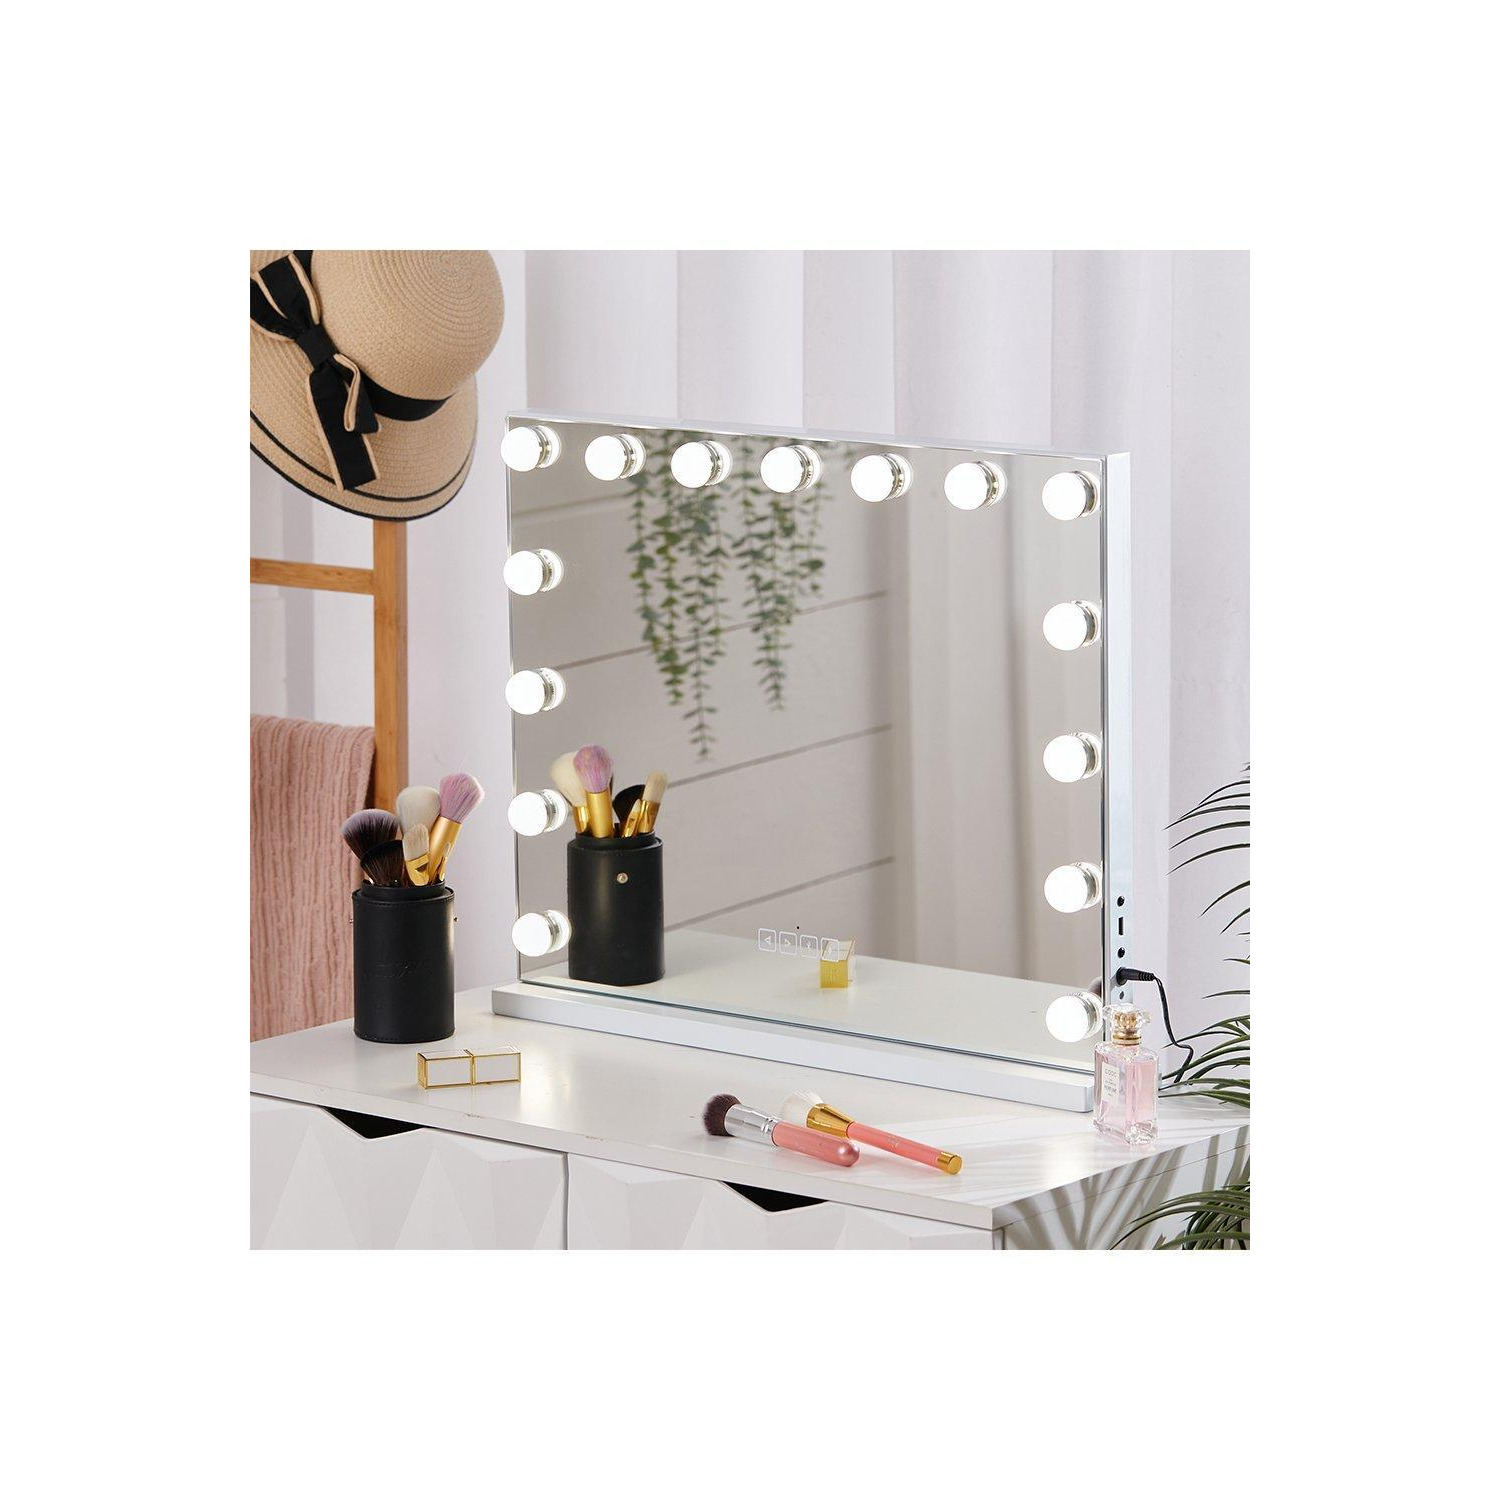 Touch Control Hollywood Vanity Mirror with USB Charging Port - image 1